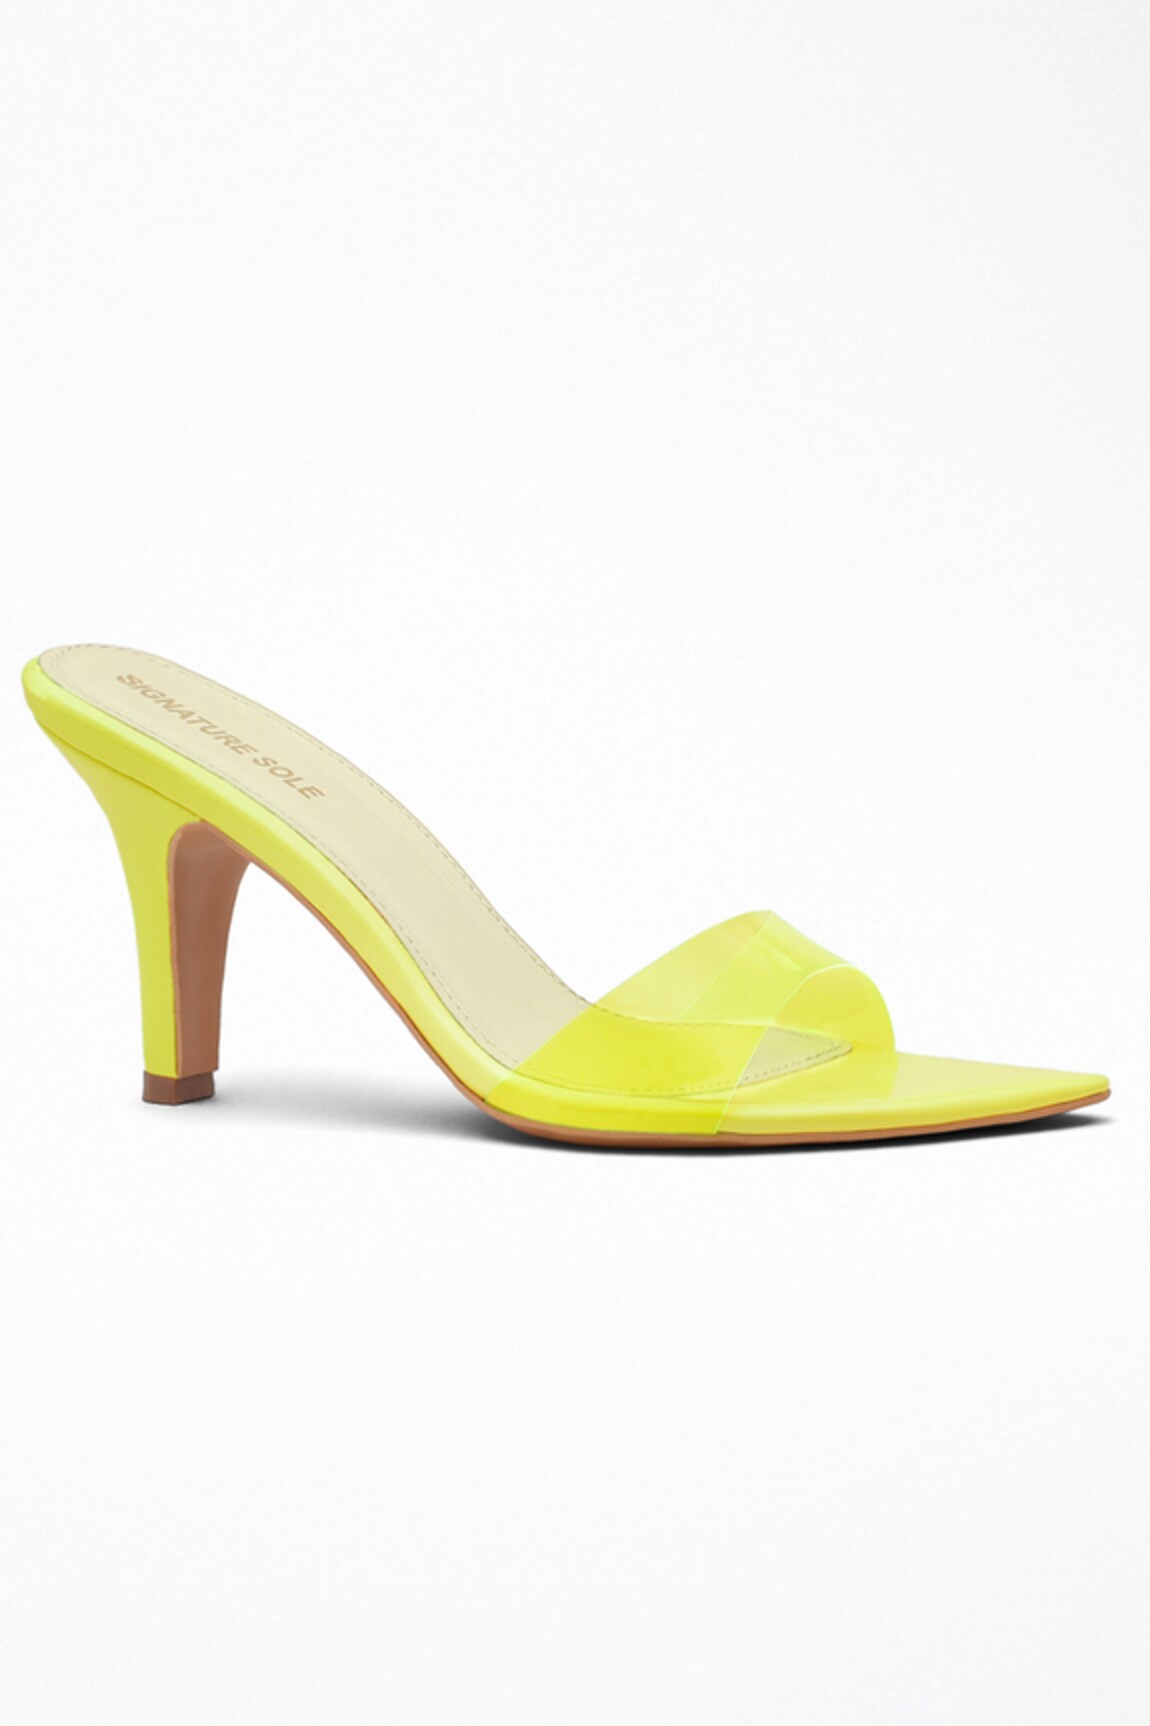 Signature Sole Neon Pointed Toe Heels